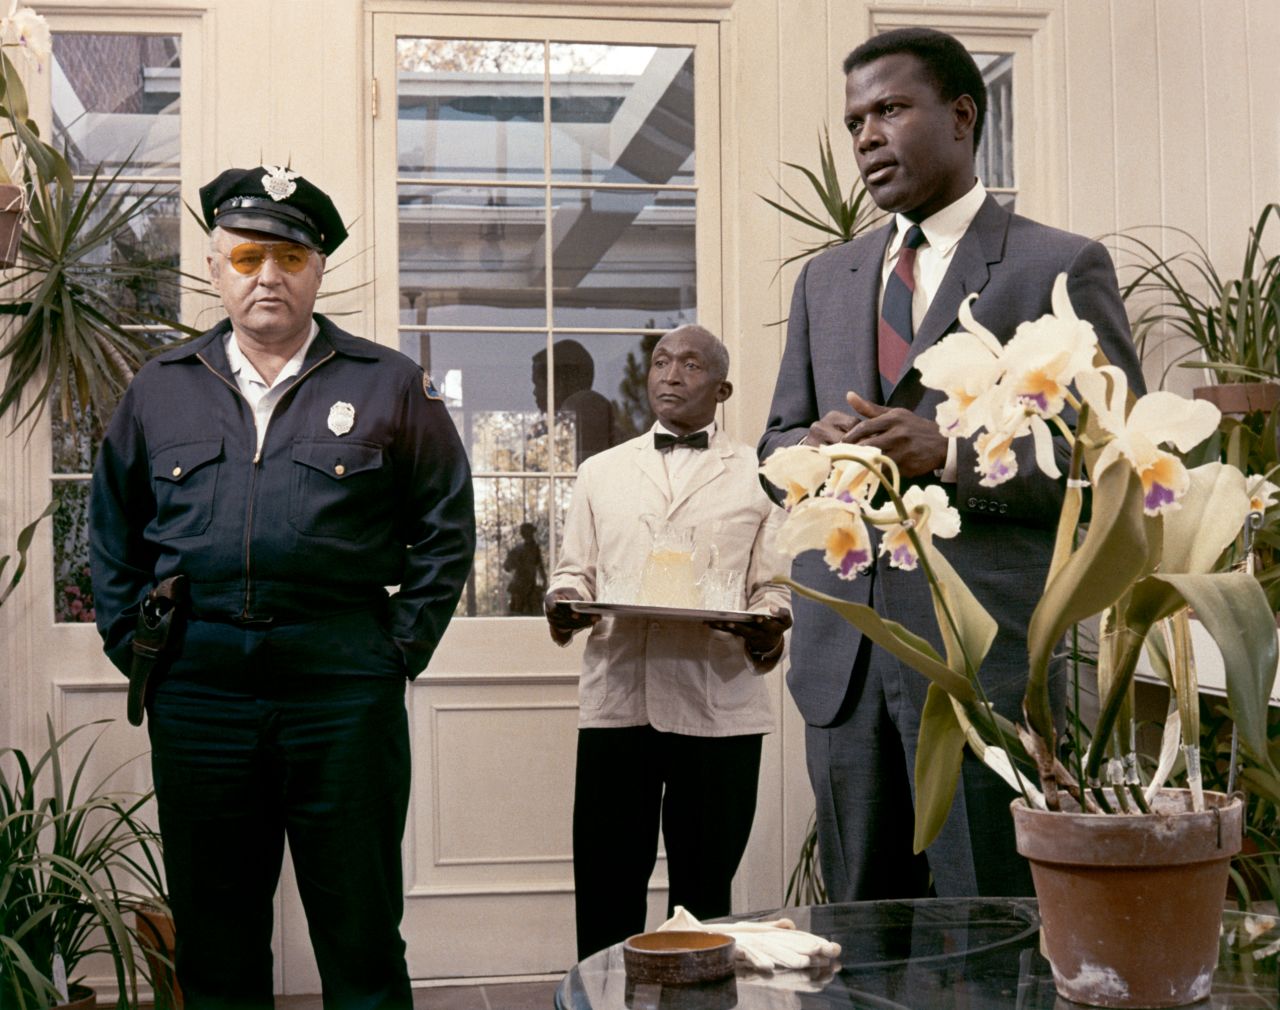 Poitier appears in a scene from "In the Heat of the Night." The 1967 film won the Oscar for best picture and is also known for one of Poitier's most famous film quotes: "They call me Mister Tibbs!"